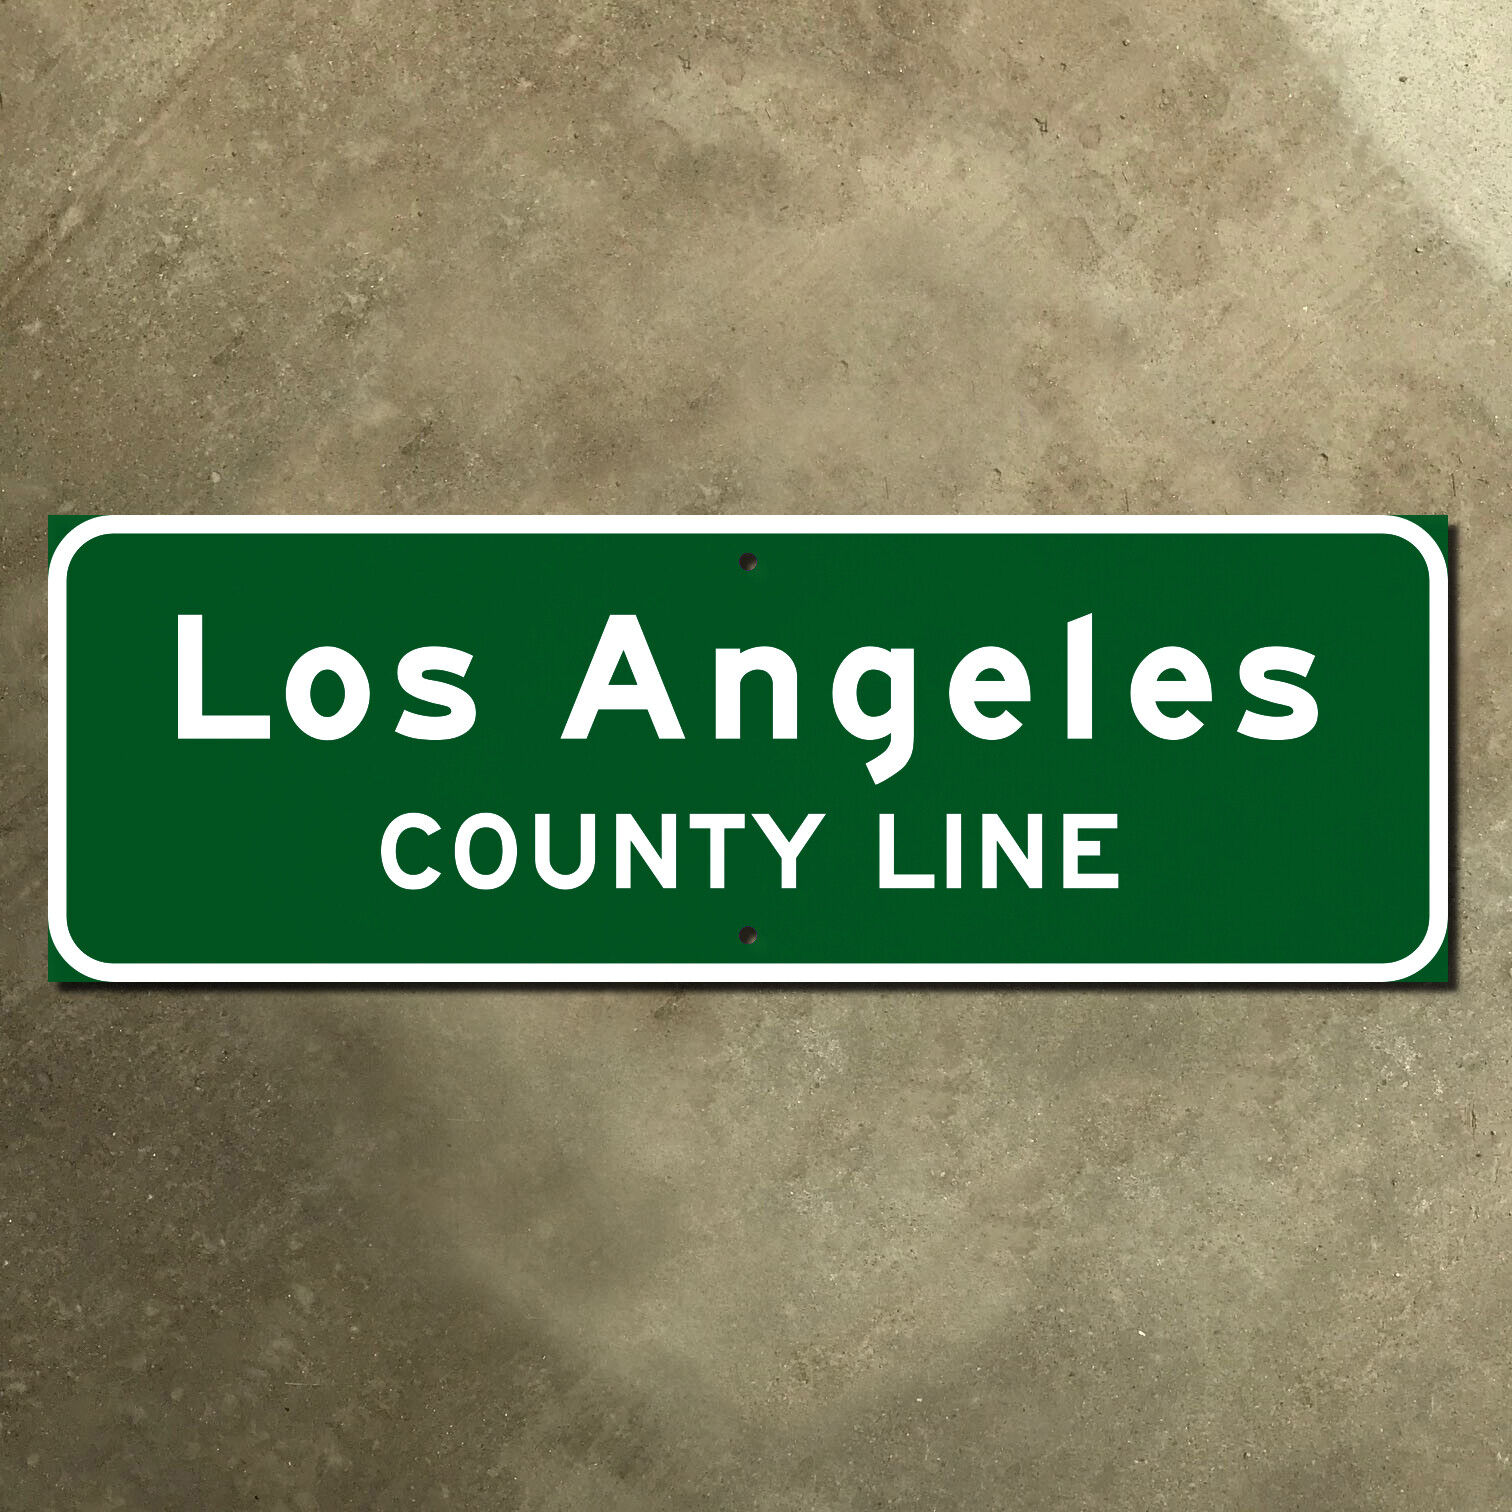 Los Angeles California county line highway road sign green freeway 1959 30x10